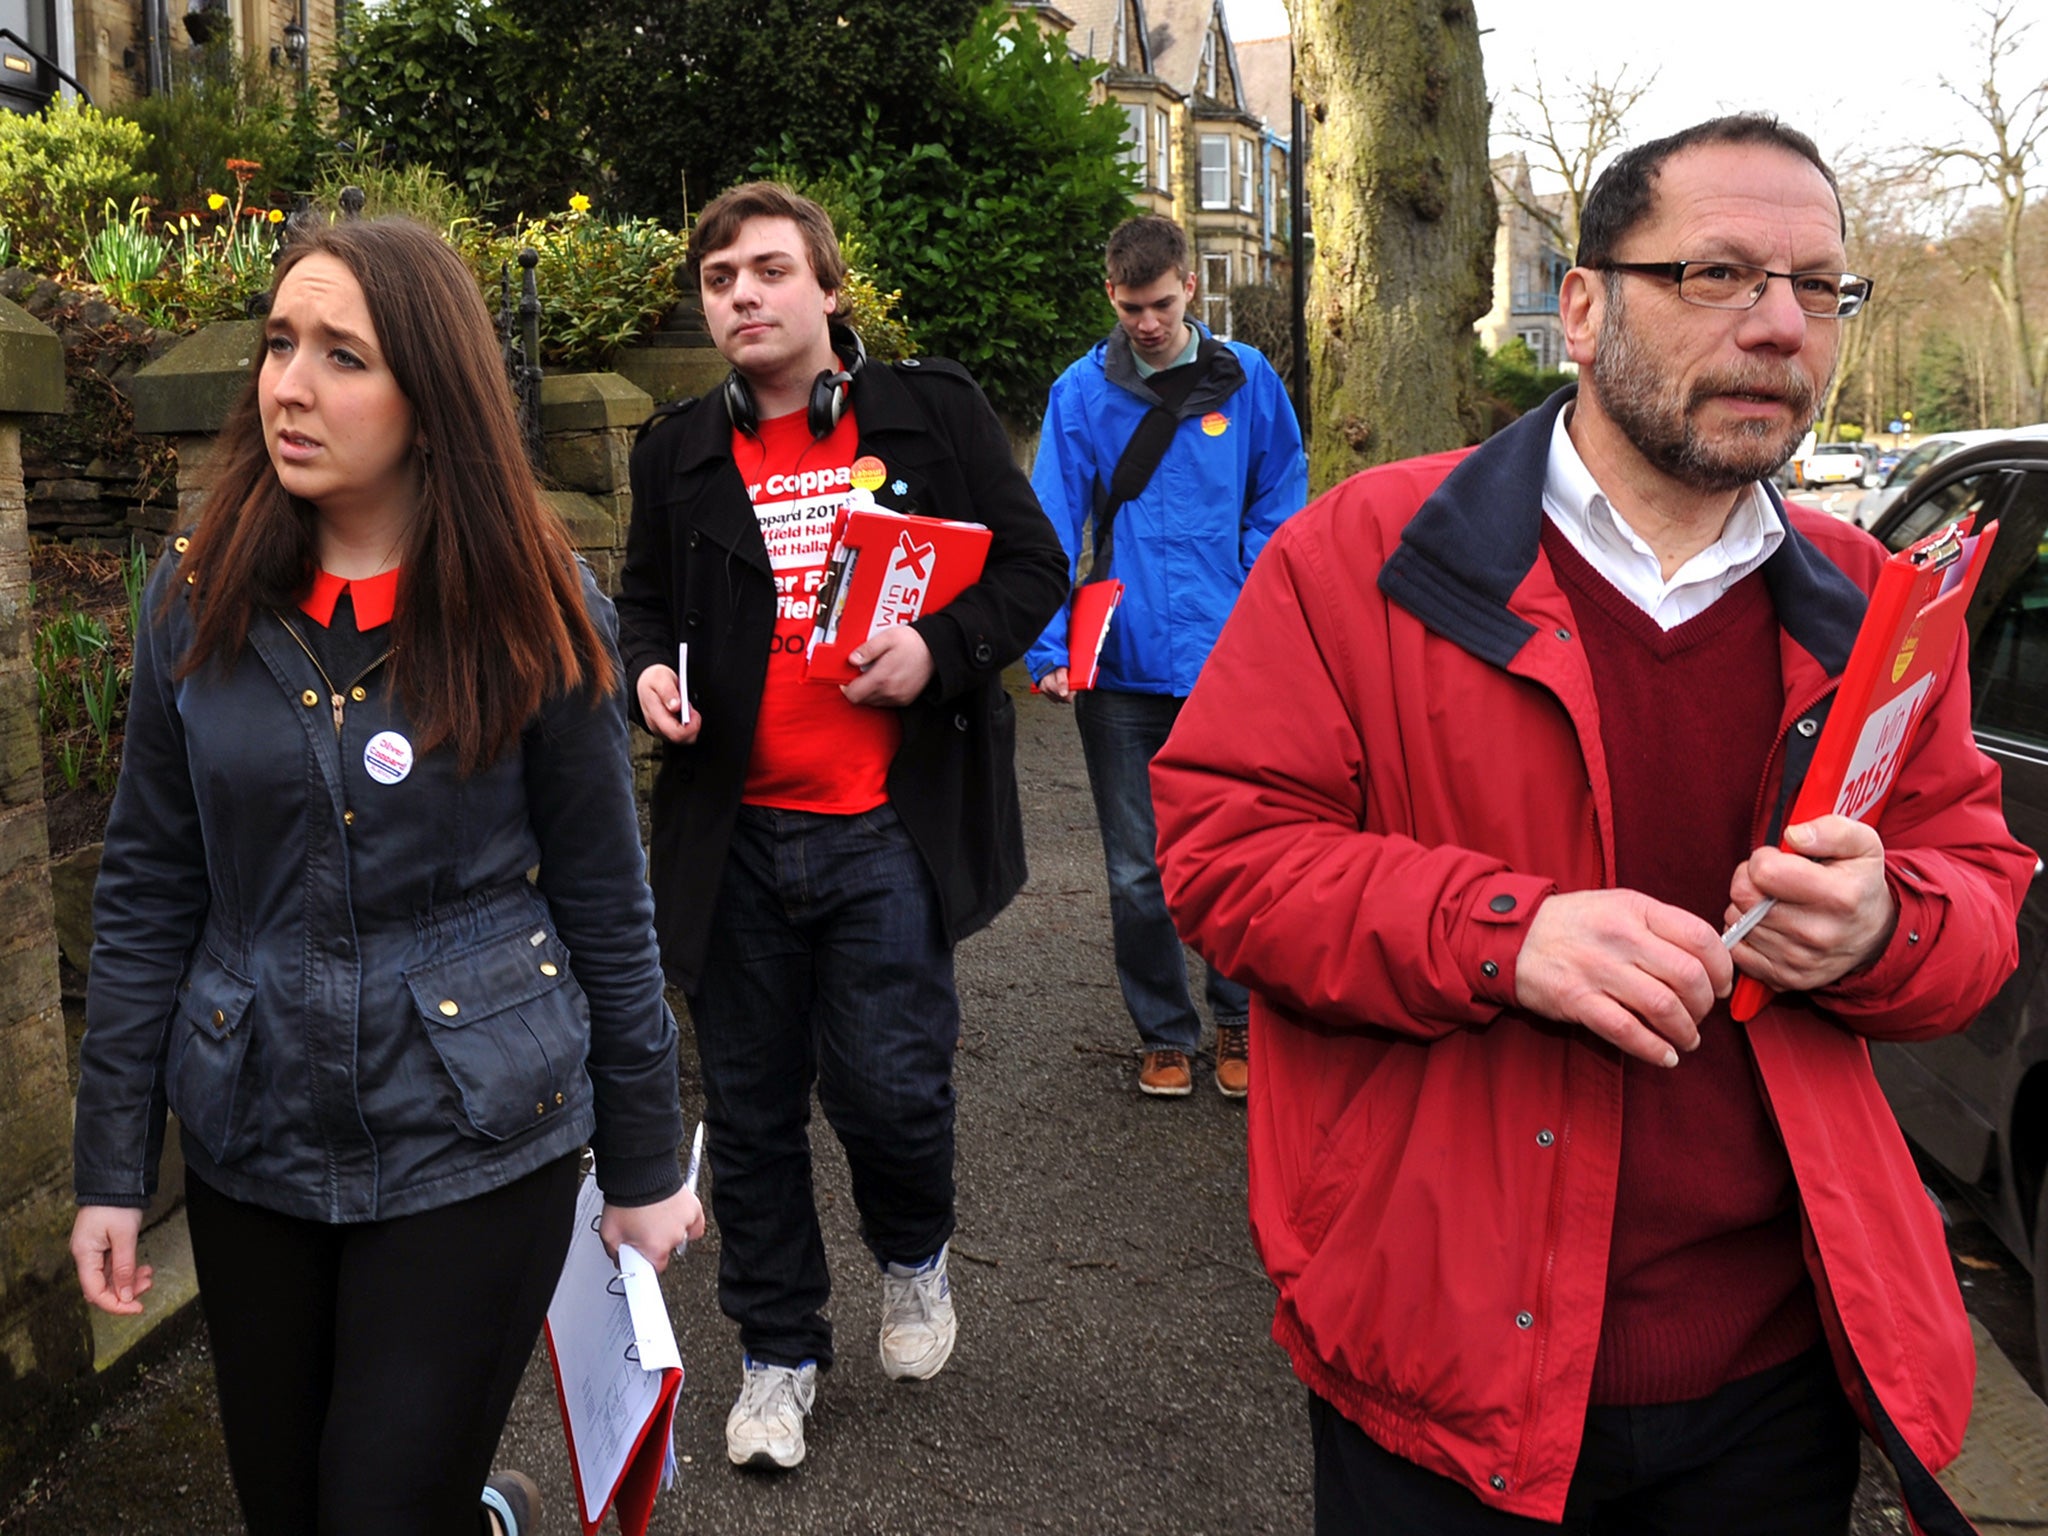 Labour activists are finding strong support in Nick Clegg’s backyard